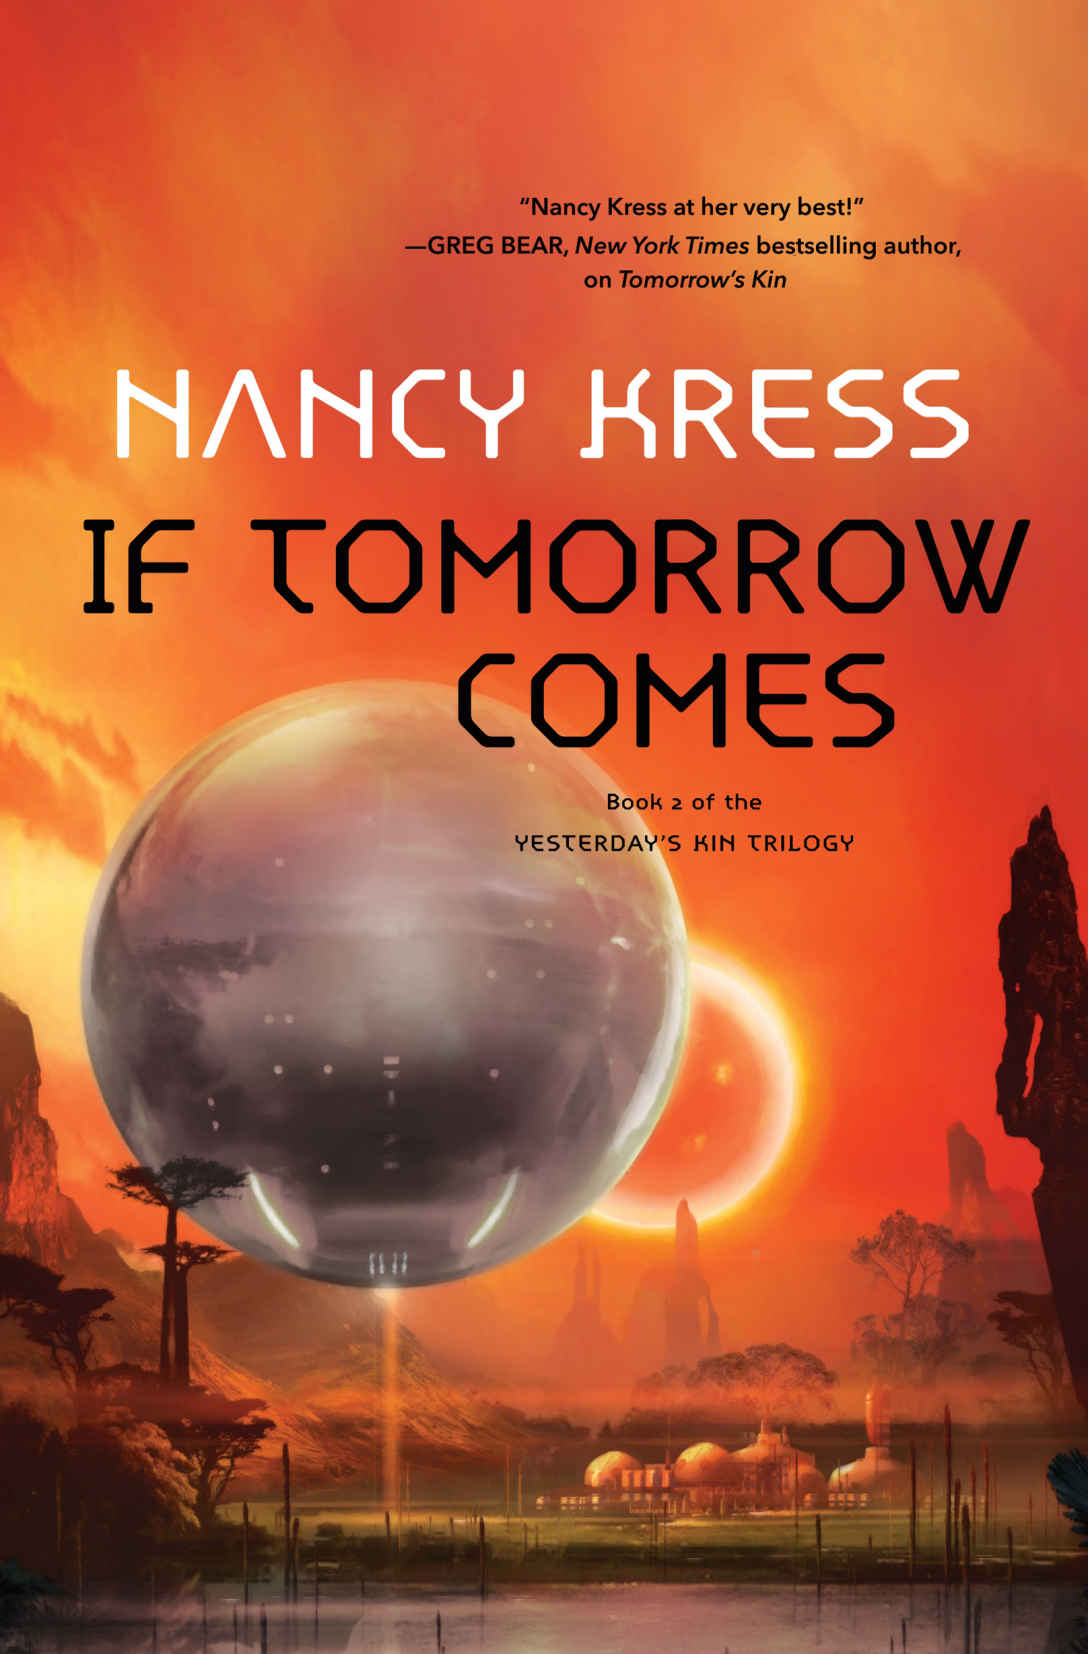 Cover of If Tomorrow Comes by  San Diego Comic Fest science fiction author guest of honor Nancy Kress